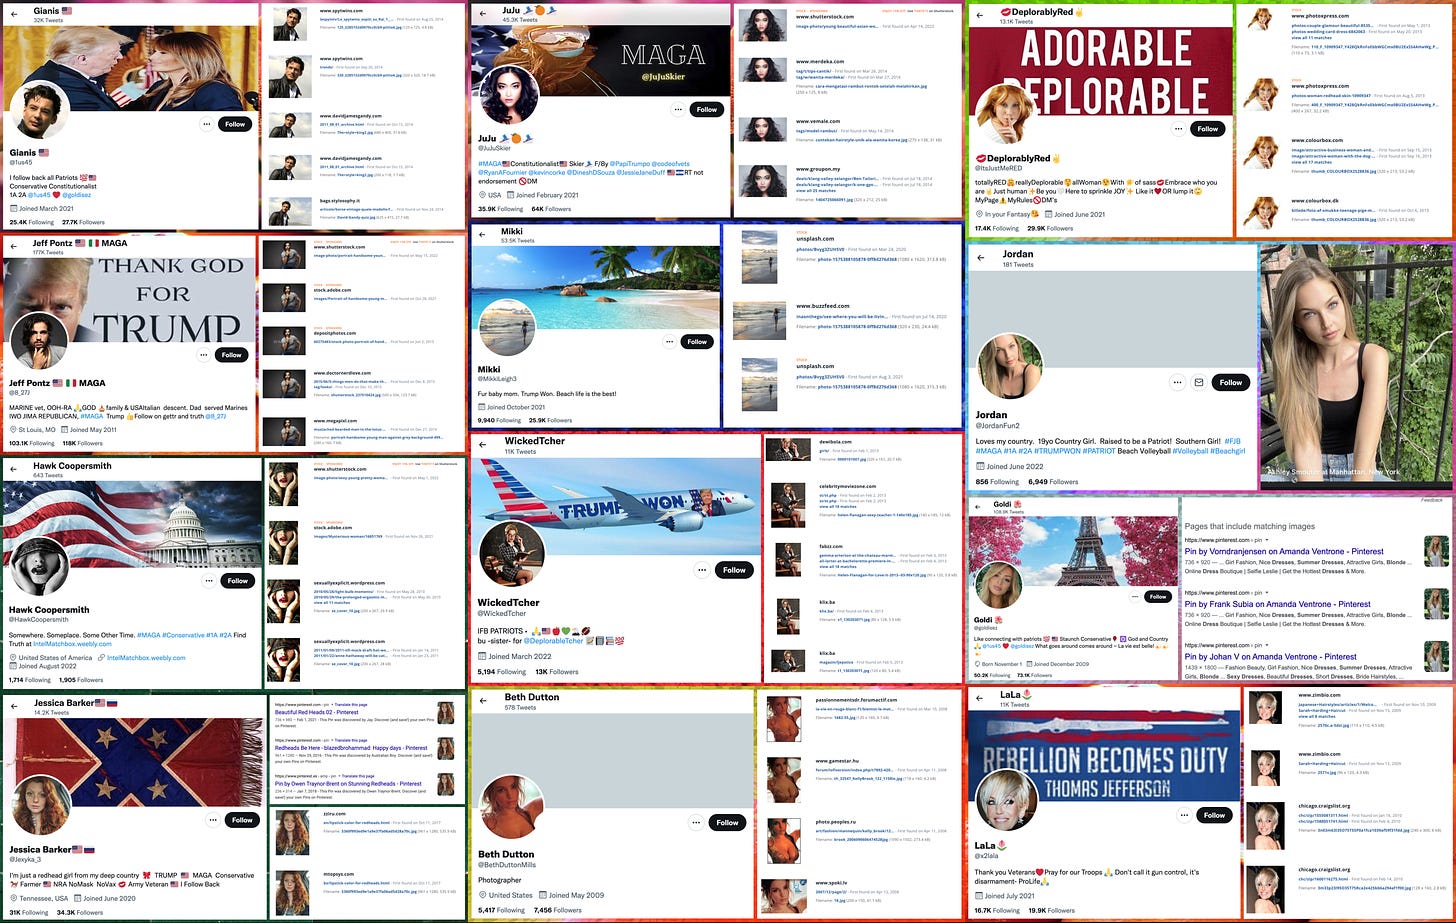 screenshots of 12 MAGA Twitter accounts, and reverse image searches demonstrating the images are plagiarized